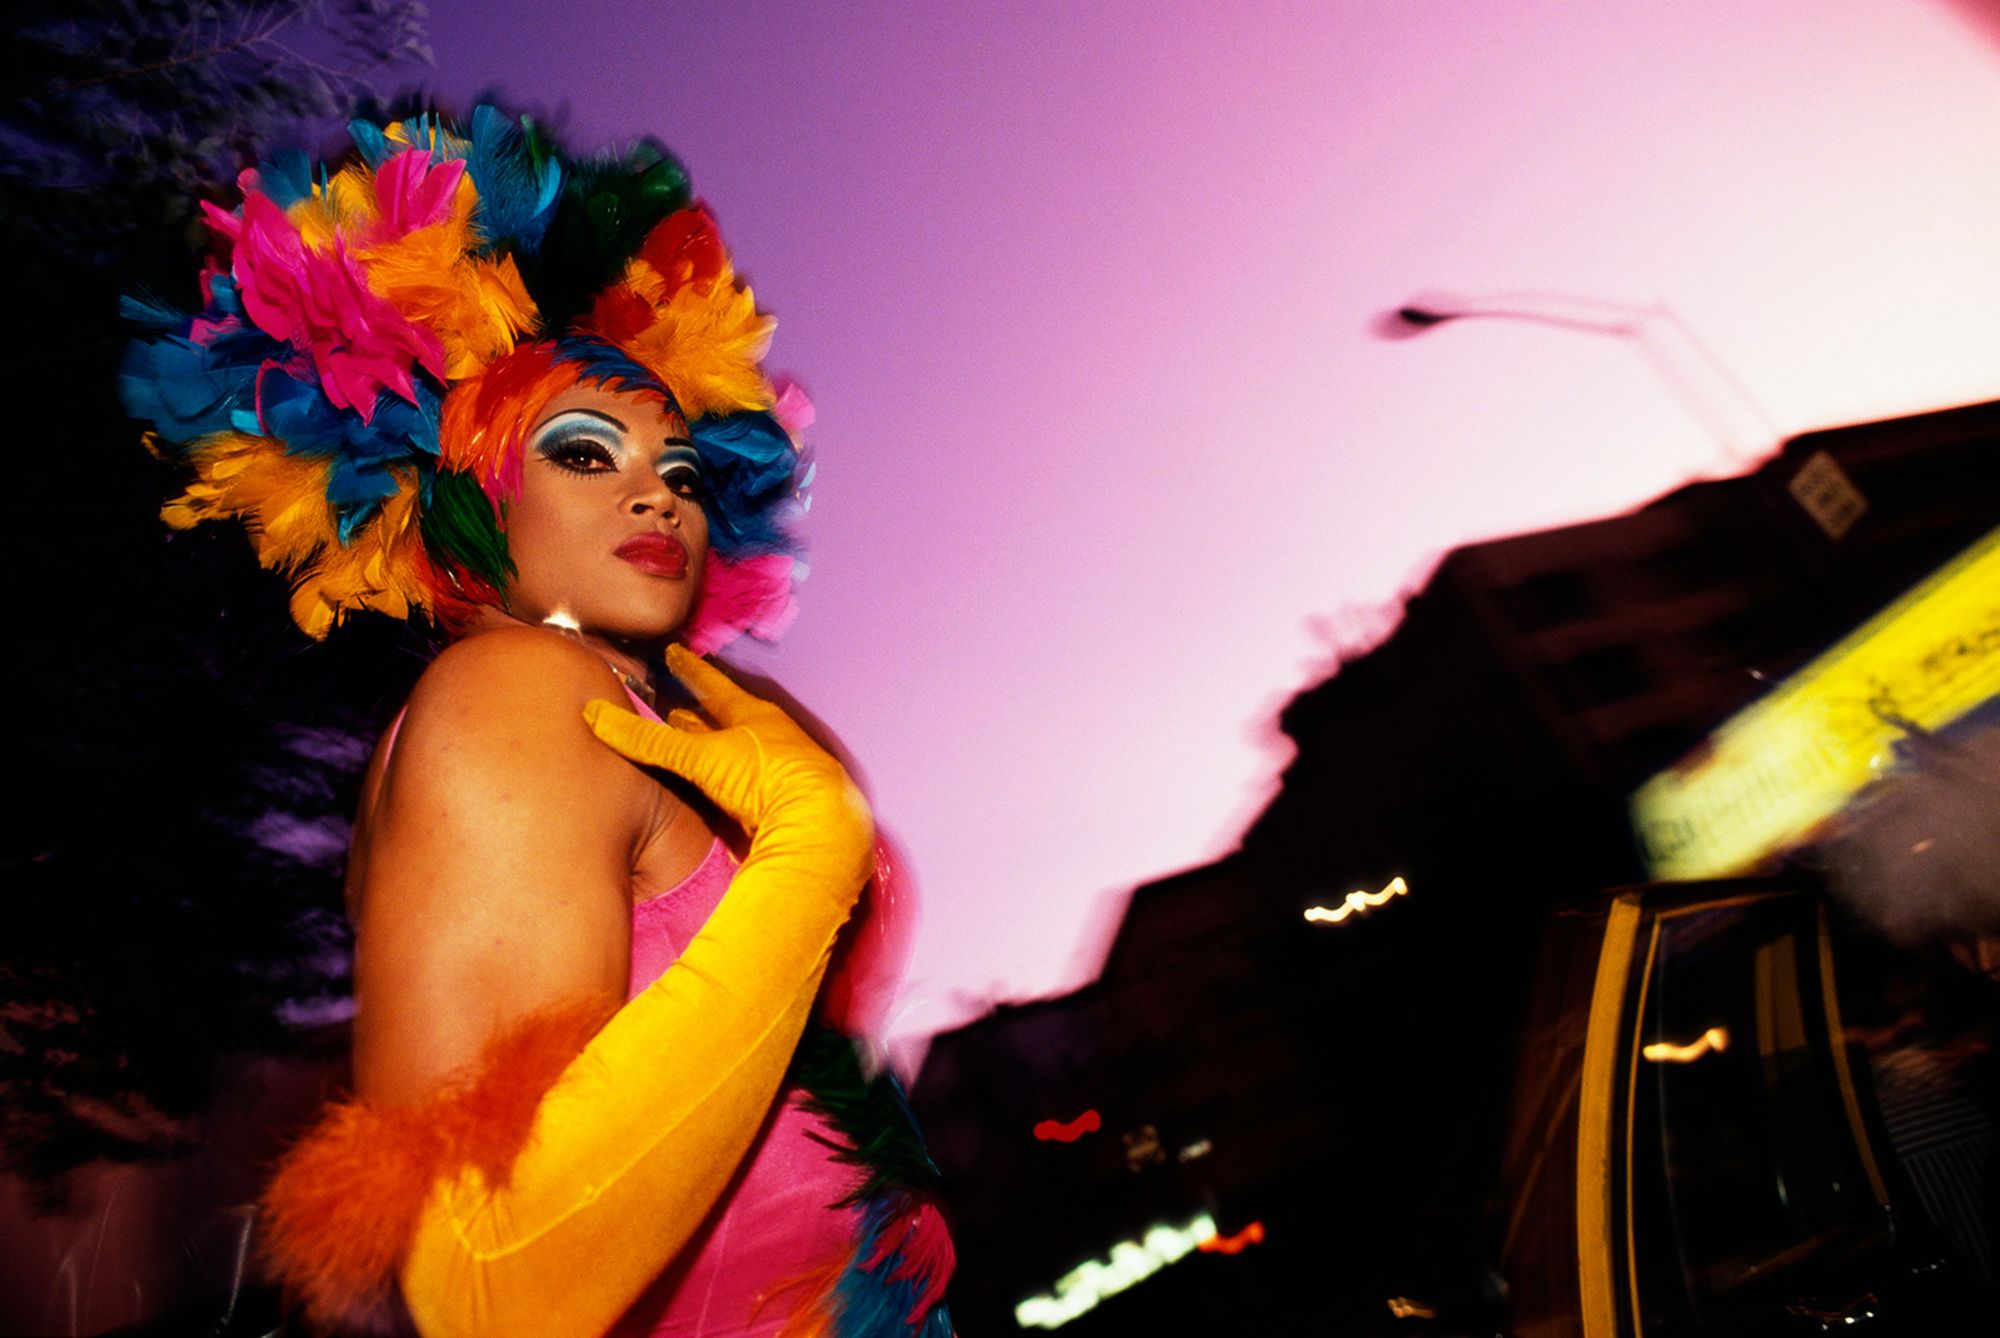 A man dons a feather headdress for the 2001 Wigstock, and annual drag festival held in Manhattan. (Photo by mark peterson/Corbis via Getty Images)